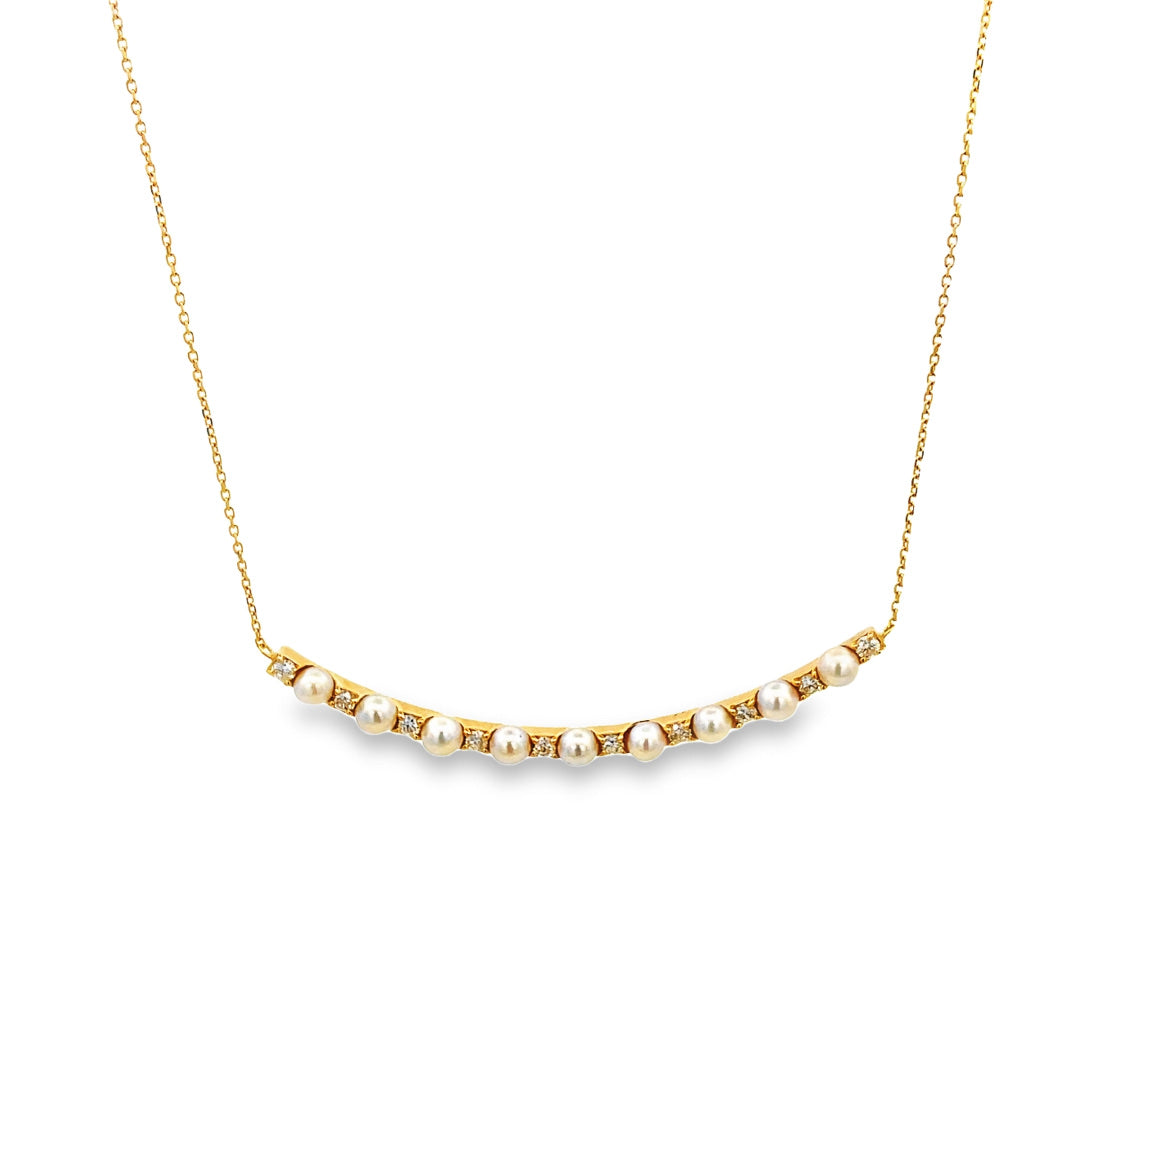 18K GOLD DIAMOND CURVED BAR WITH PEARLS NECKLACE